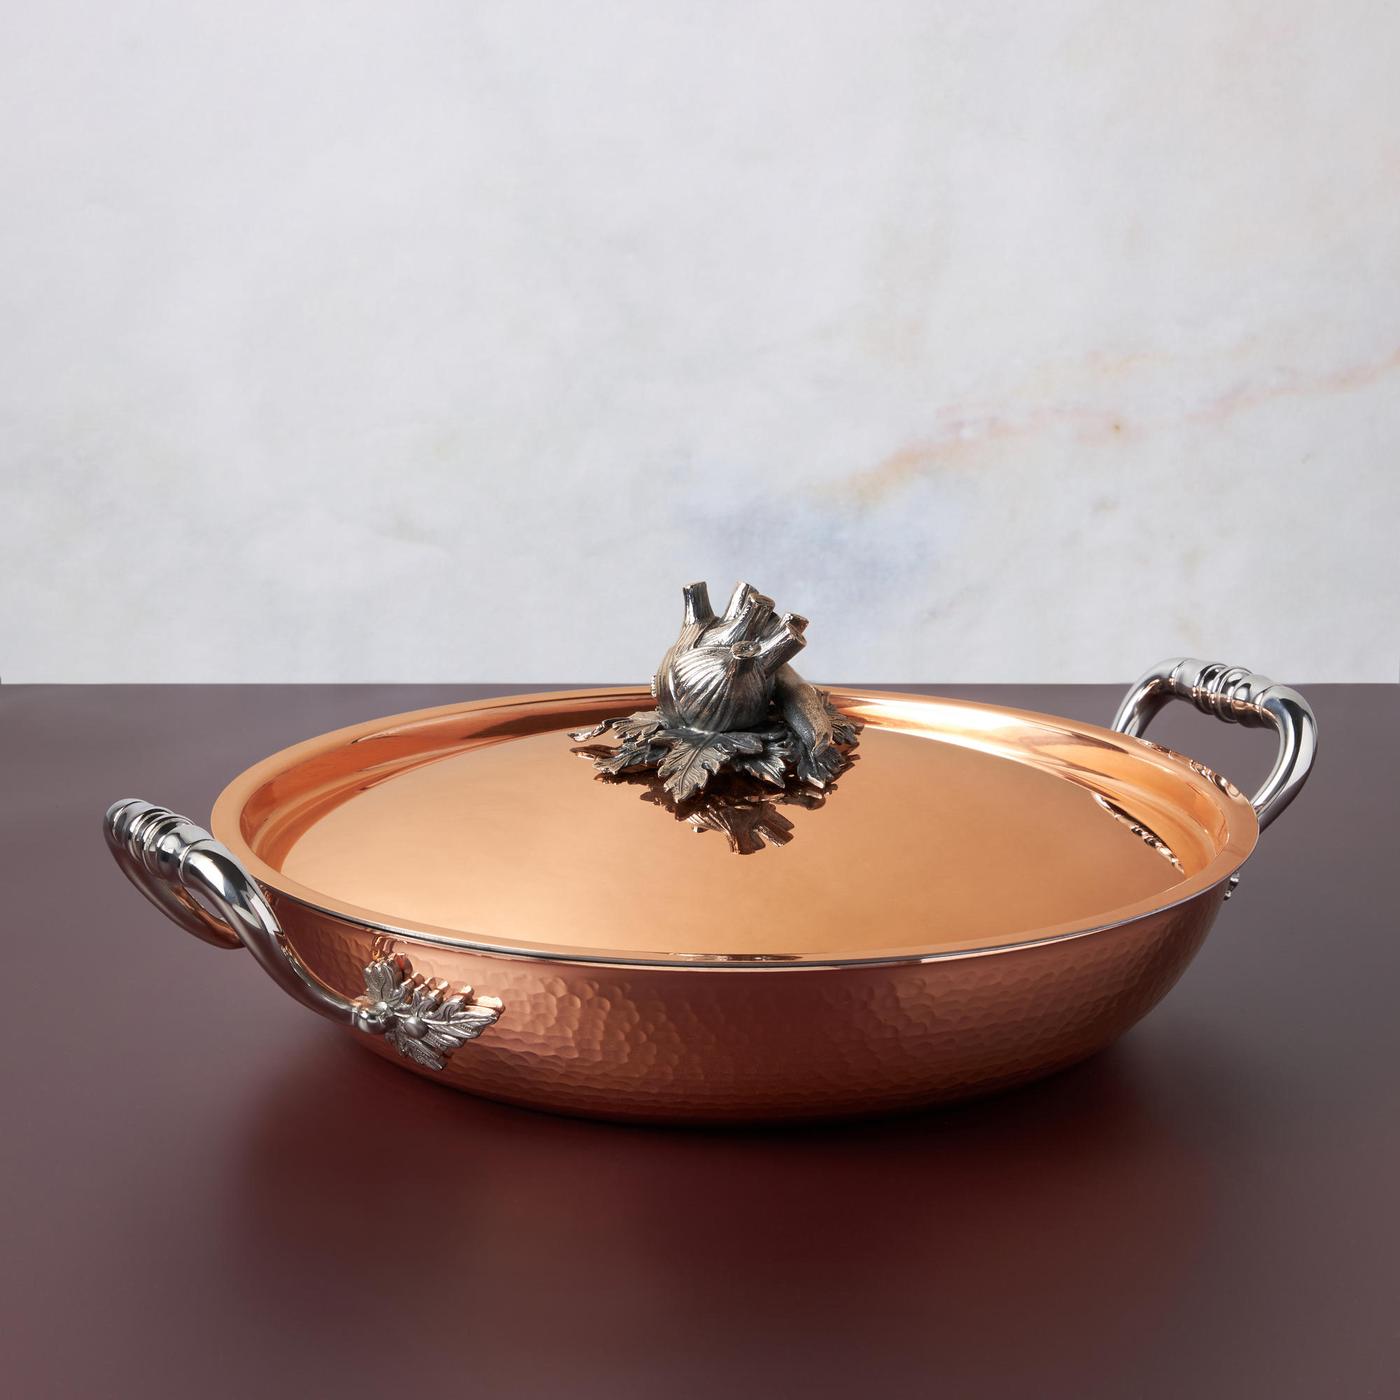 Ruffoni Historia Hammered Copper Chef's Pan with Acorn Handle